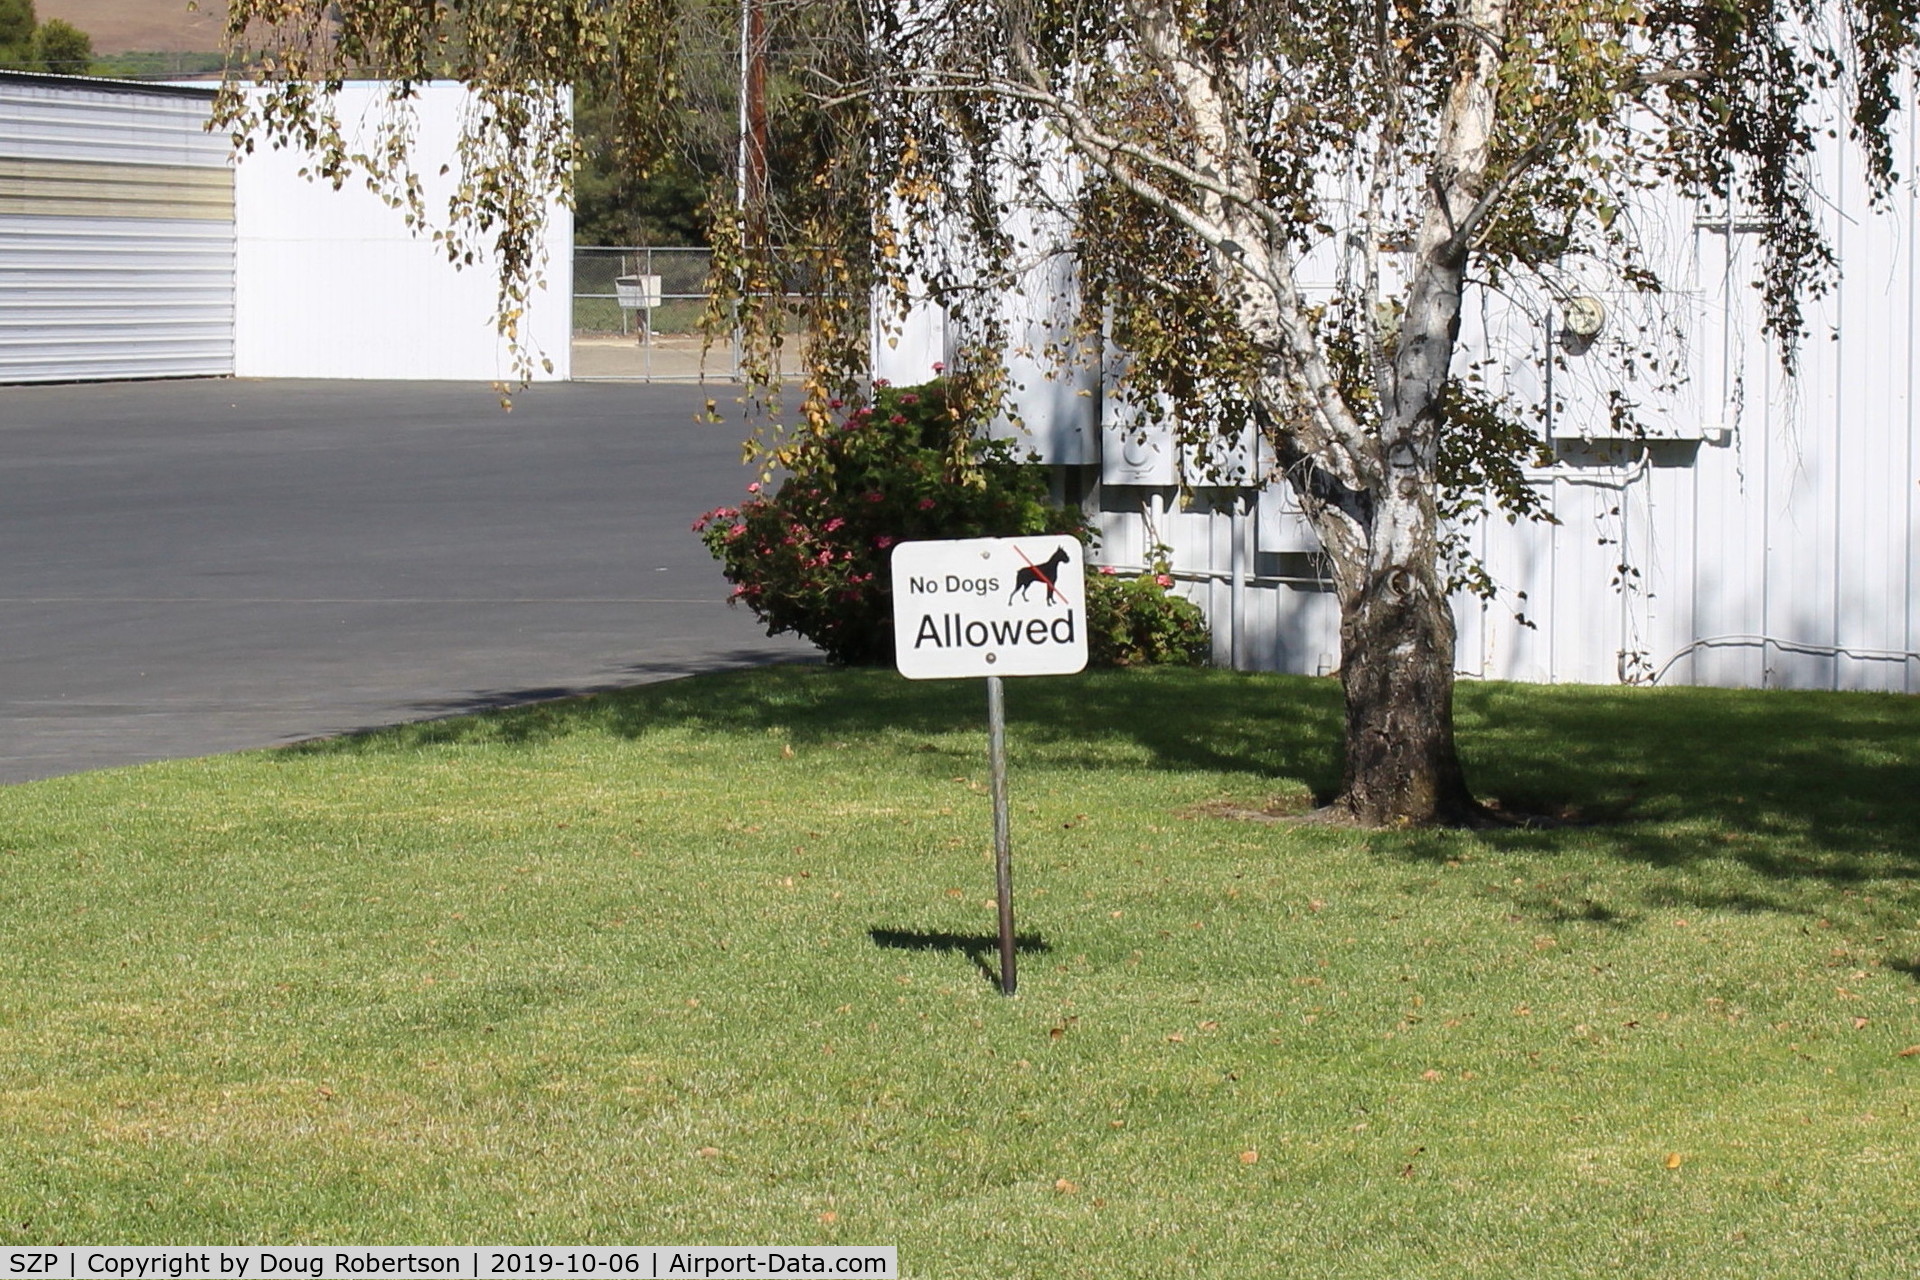 Santa Paula Airport (SZP) - No Dogs-posted in SZP's western newer section.